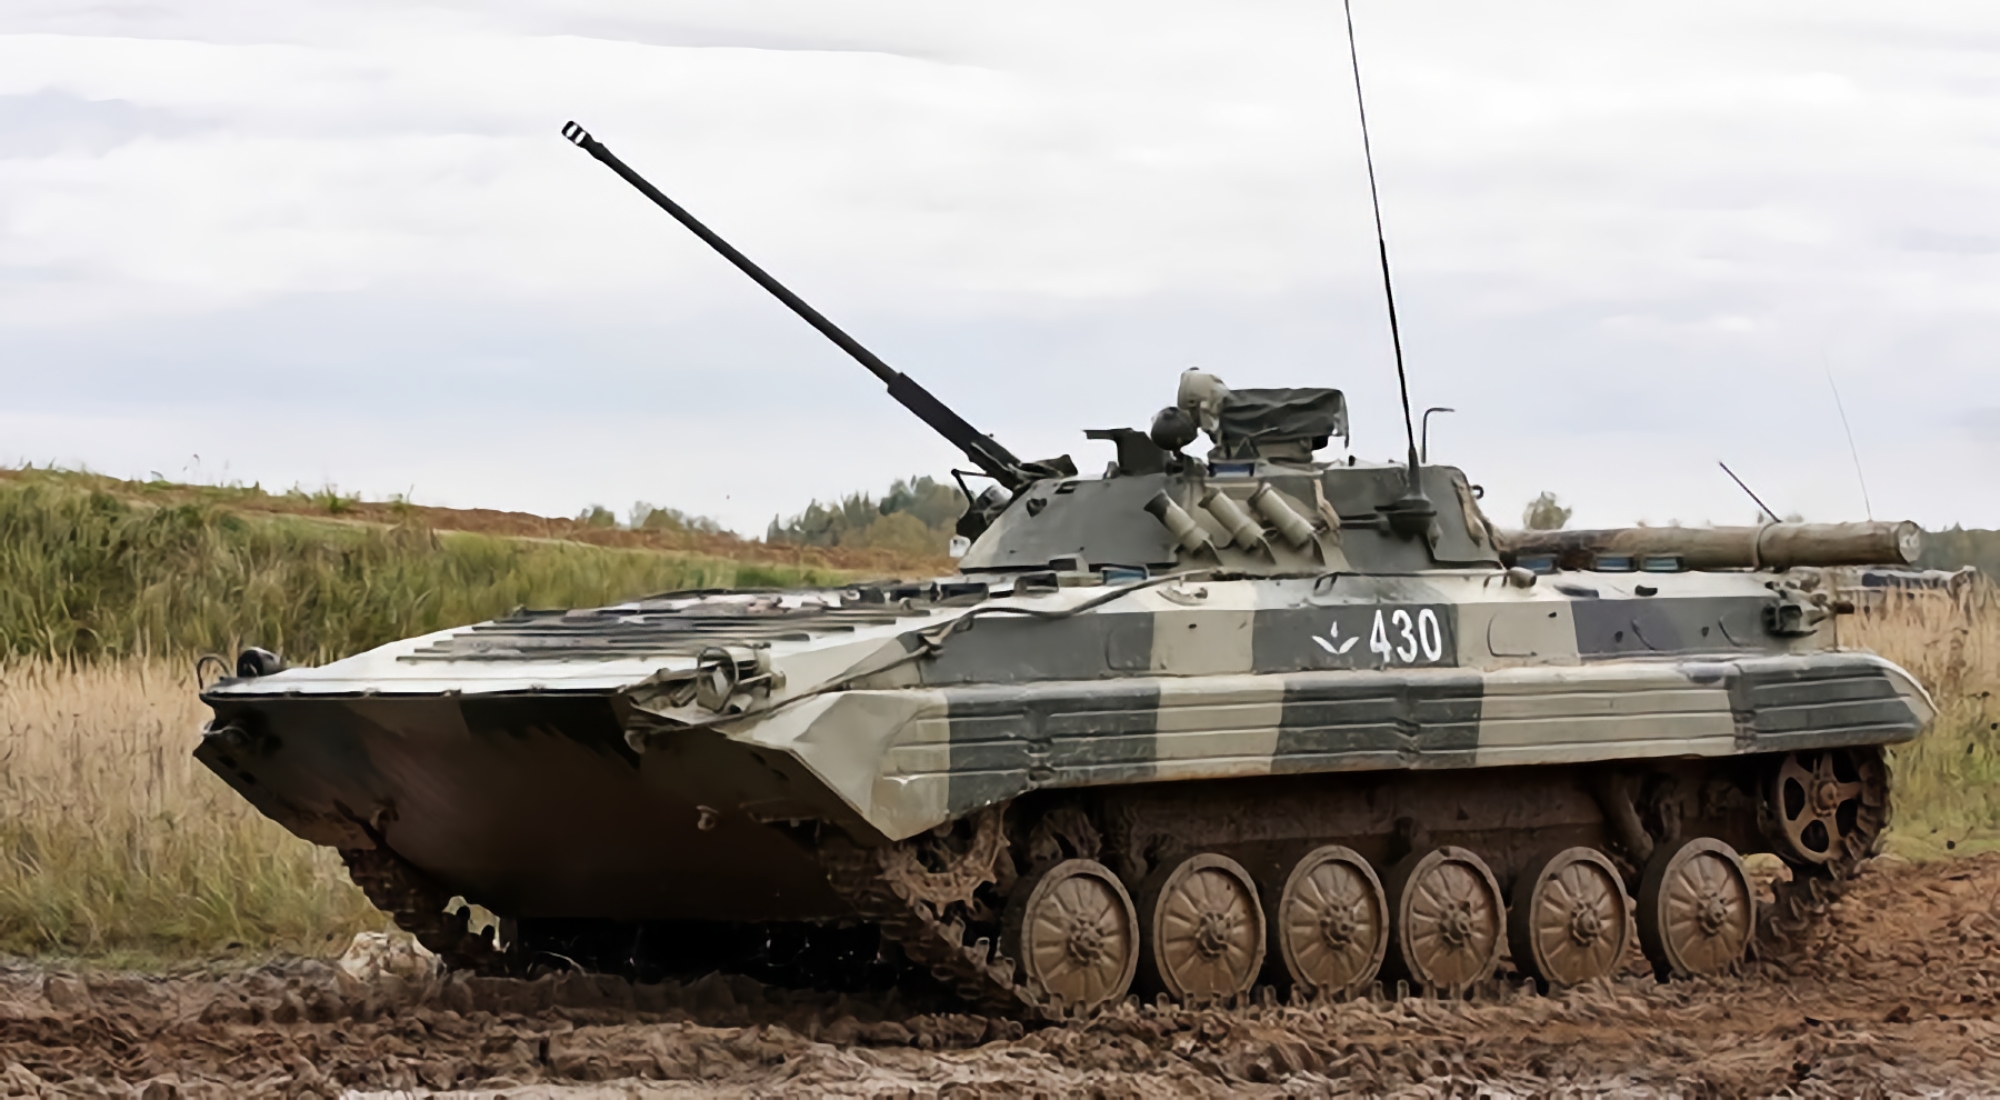 Another good trophy: the Ukrainian Armed Forces captured a Russian BMP-2 with unusual armor